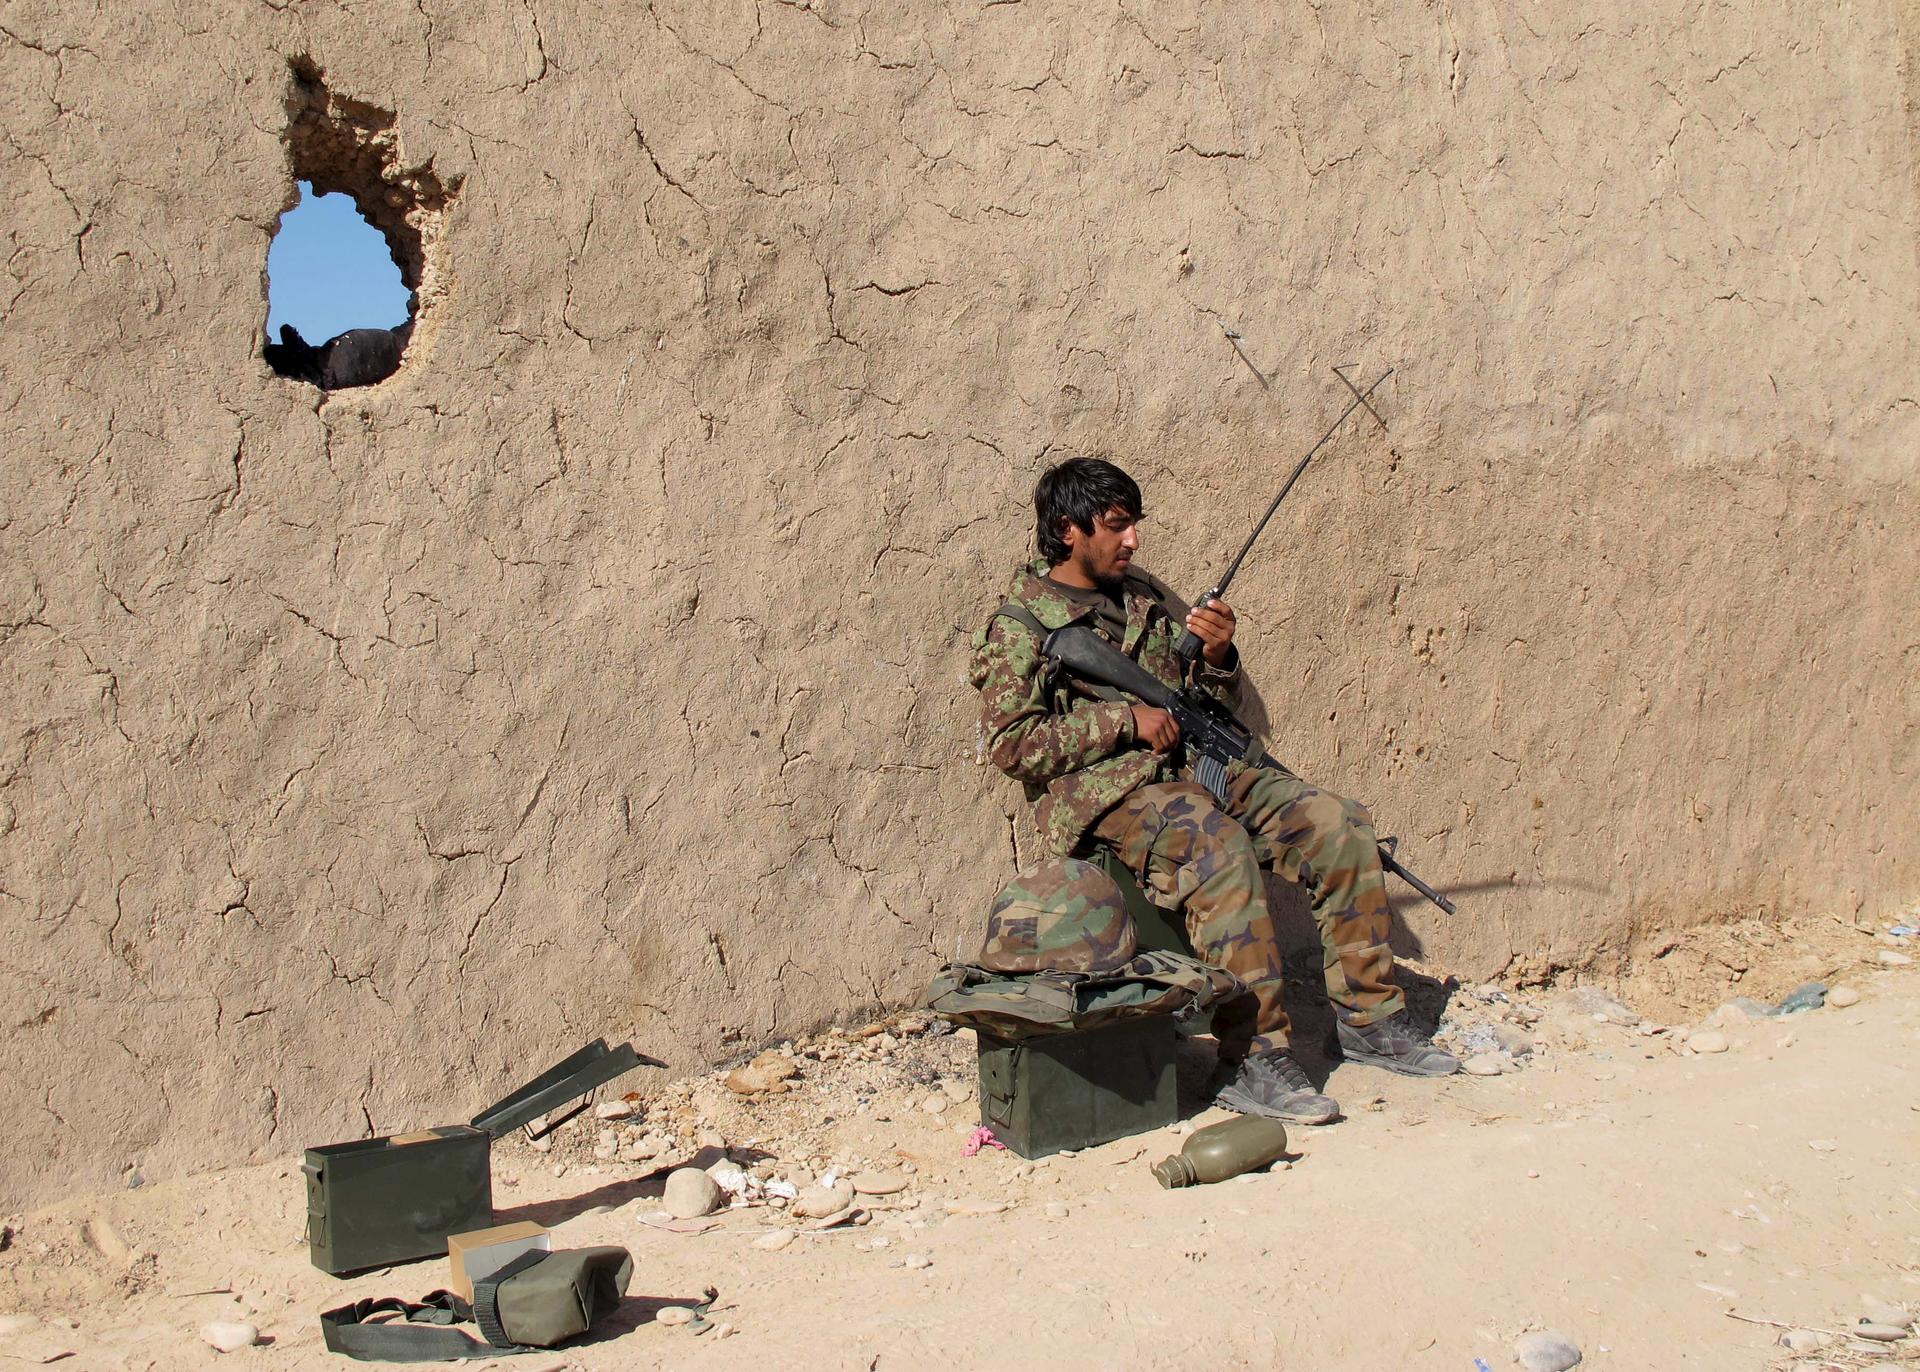 An Afghan National Army (ANA) soldier speaks on a radio at an outpost in Helmand province, December 20, 2015.